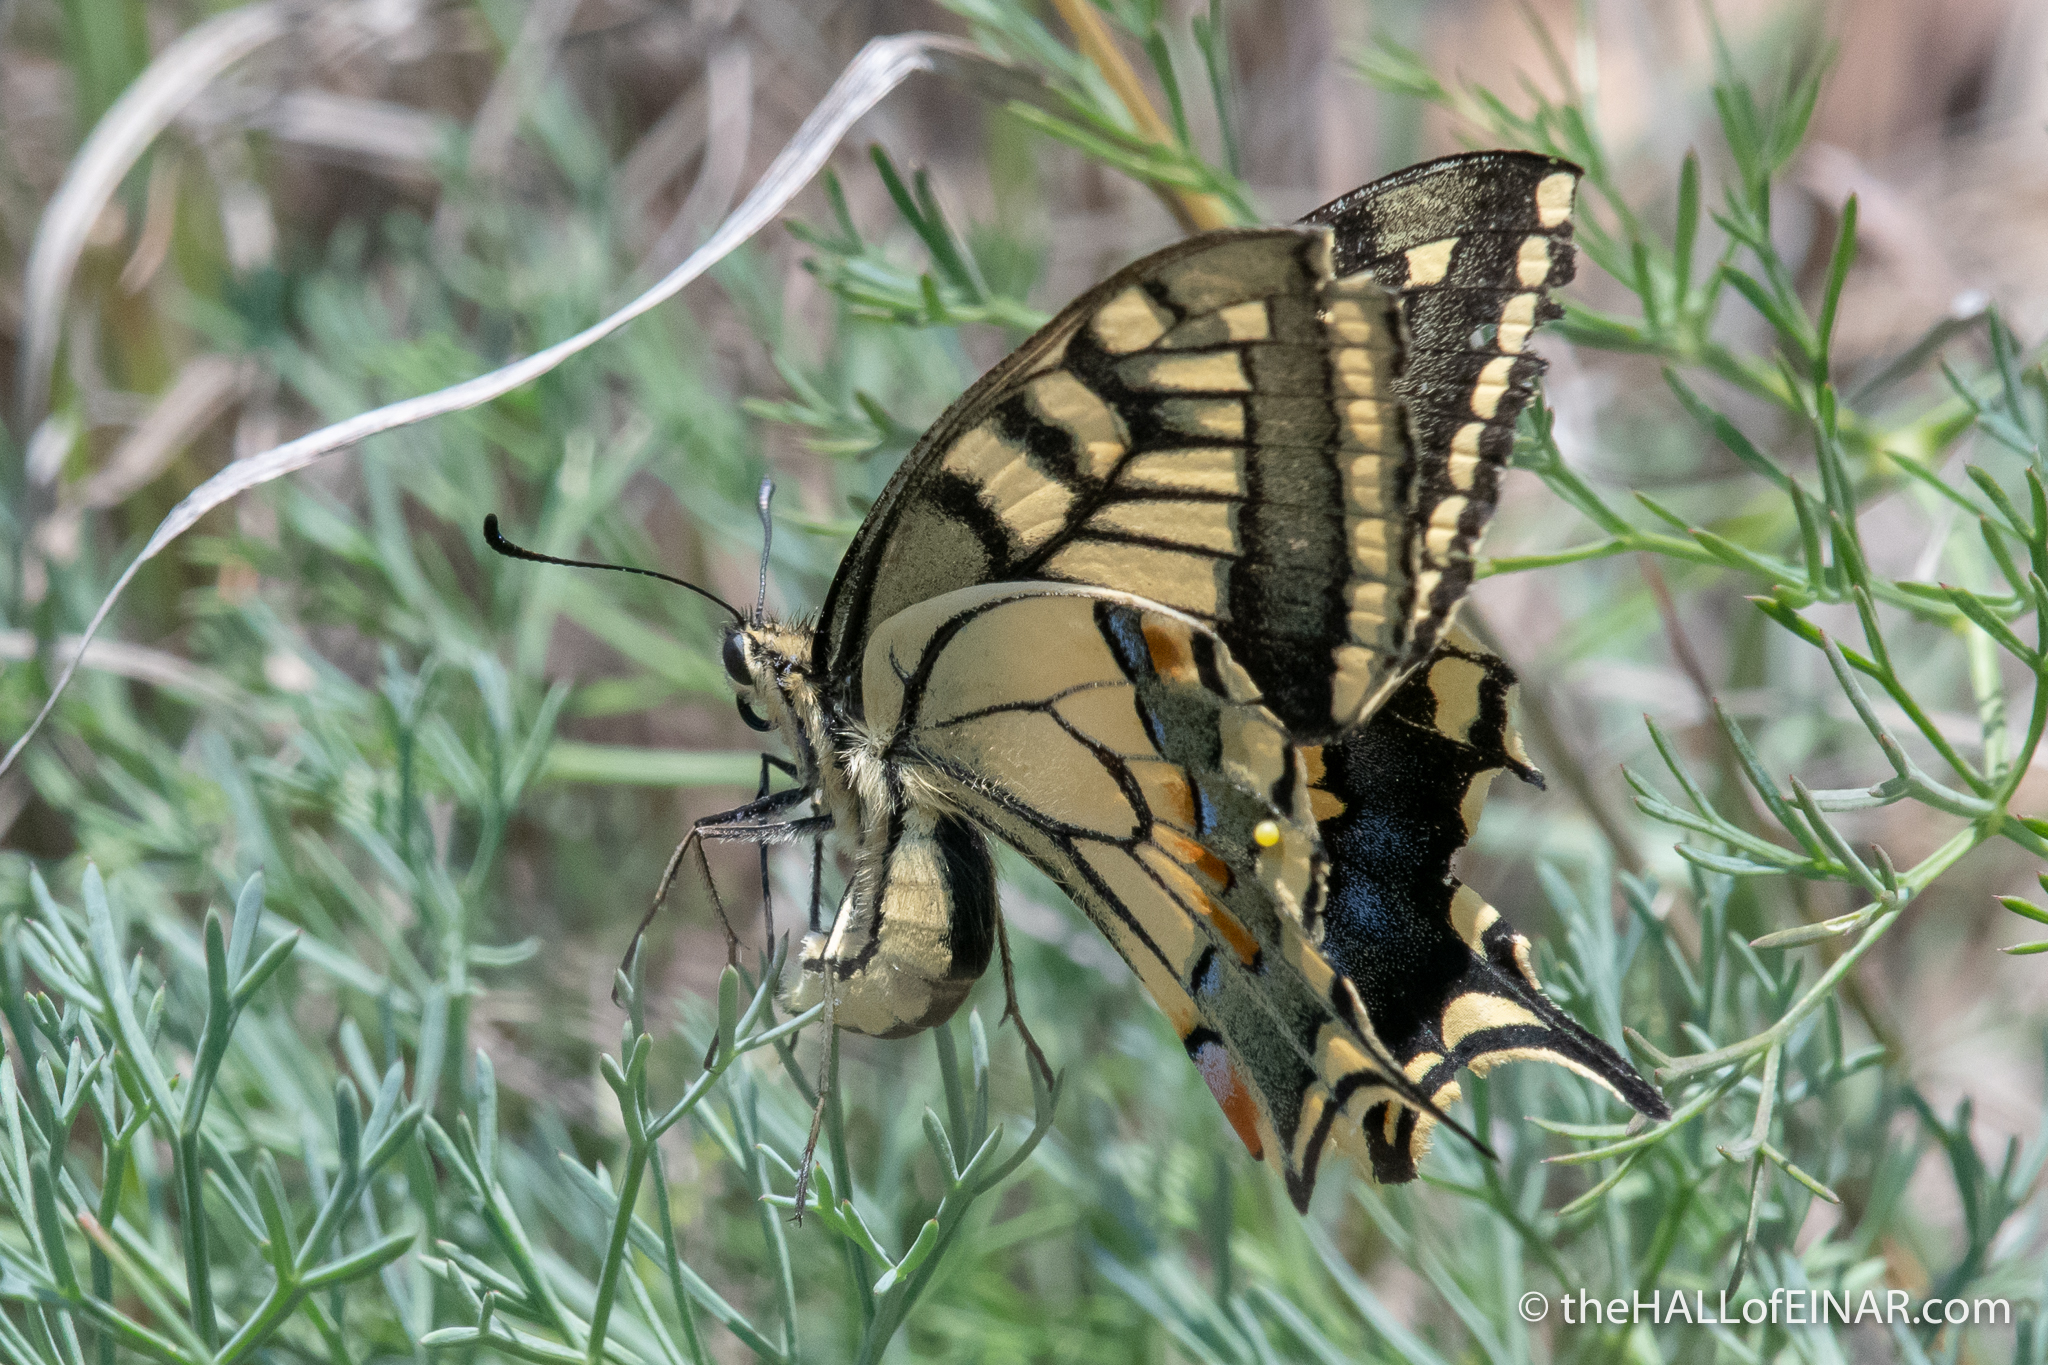 Swallowtail butterfly - Matera - The Hall of Einar - photograph (c) David Bailey (not the)